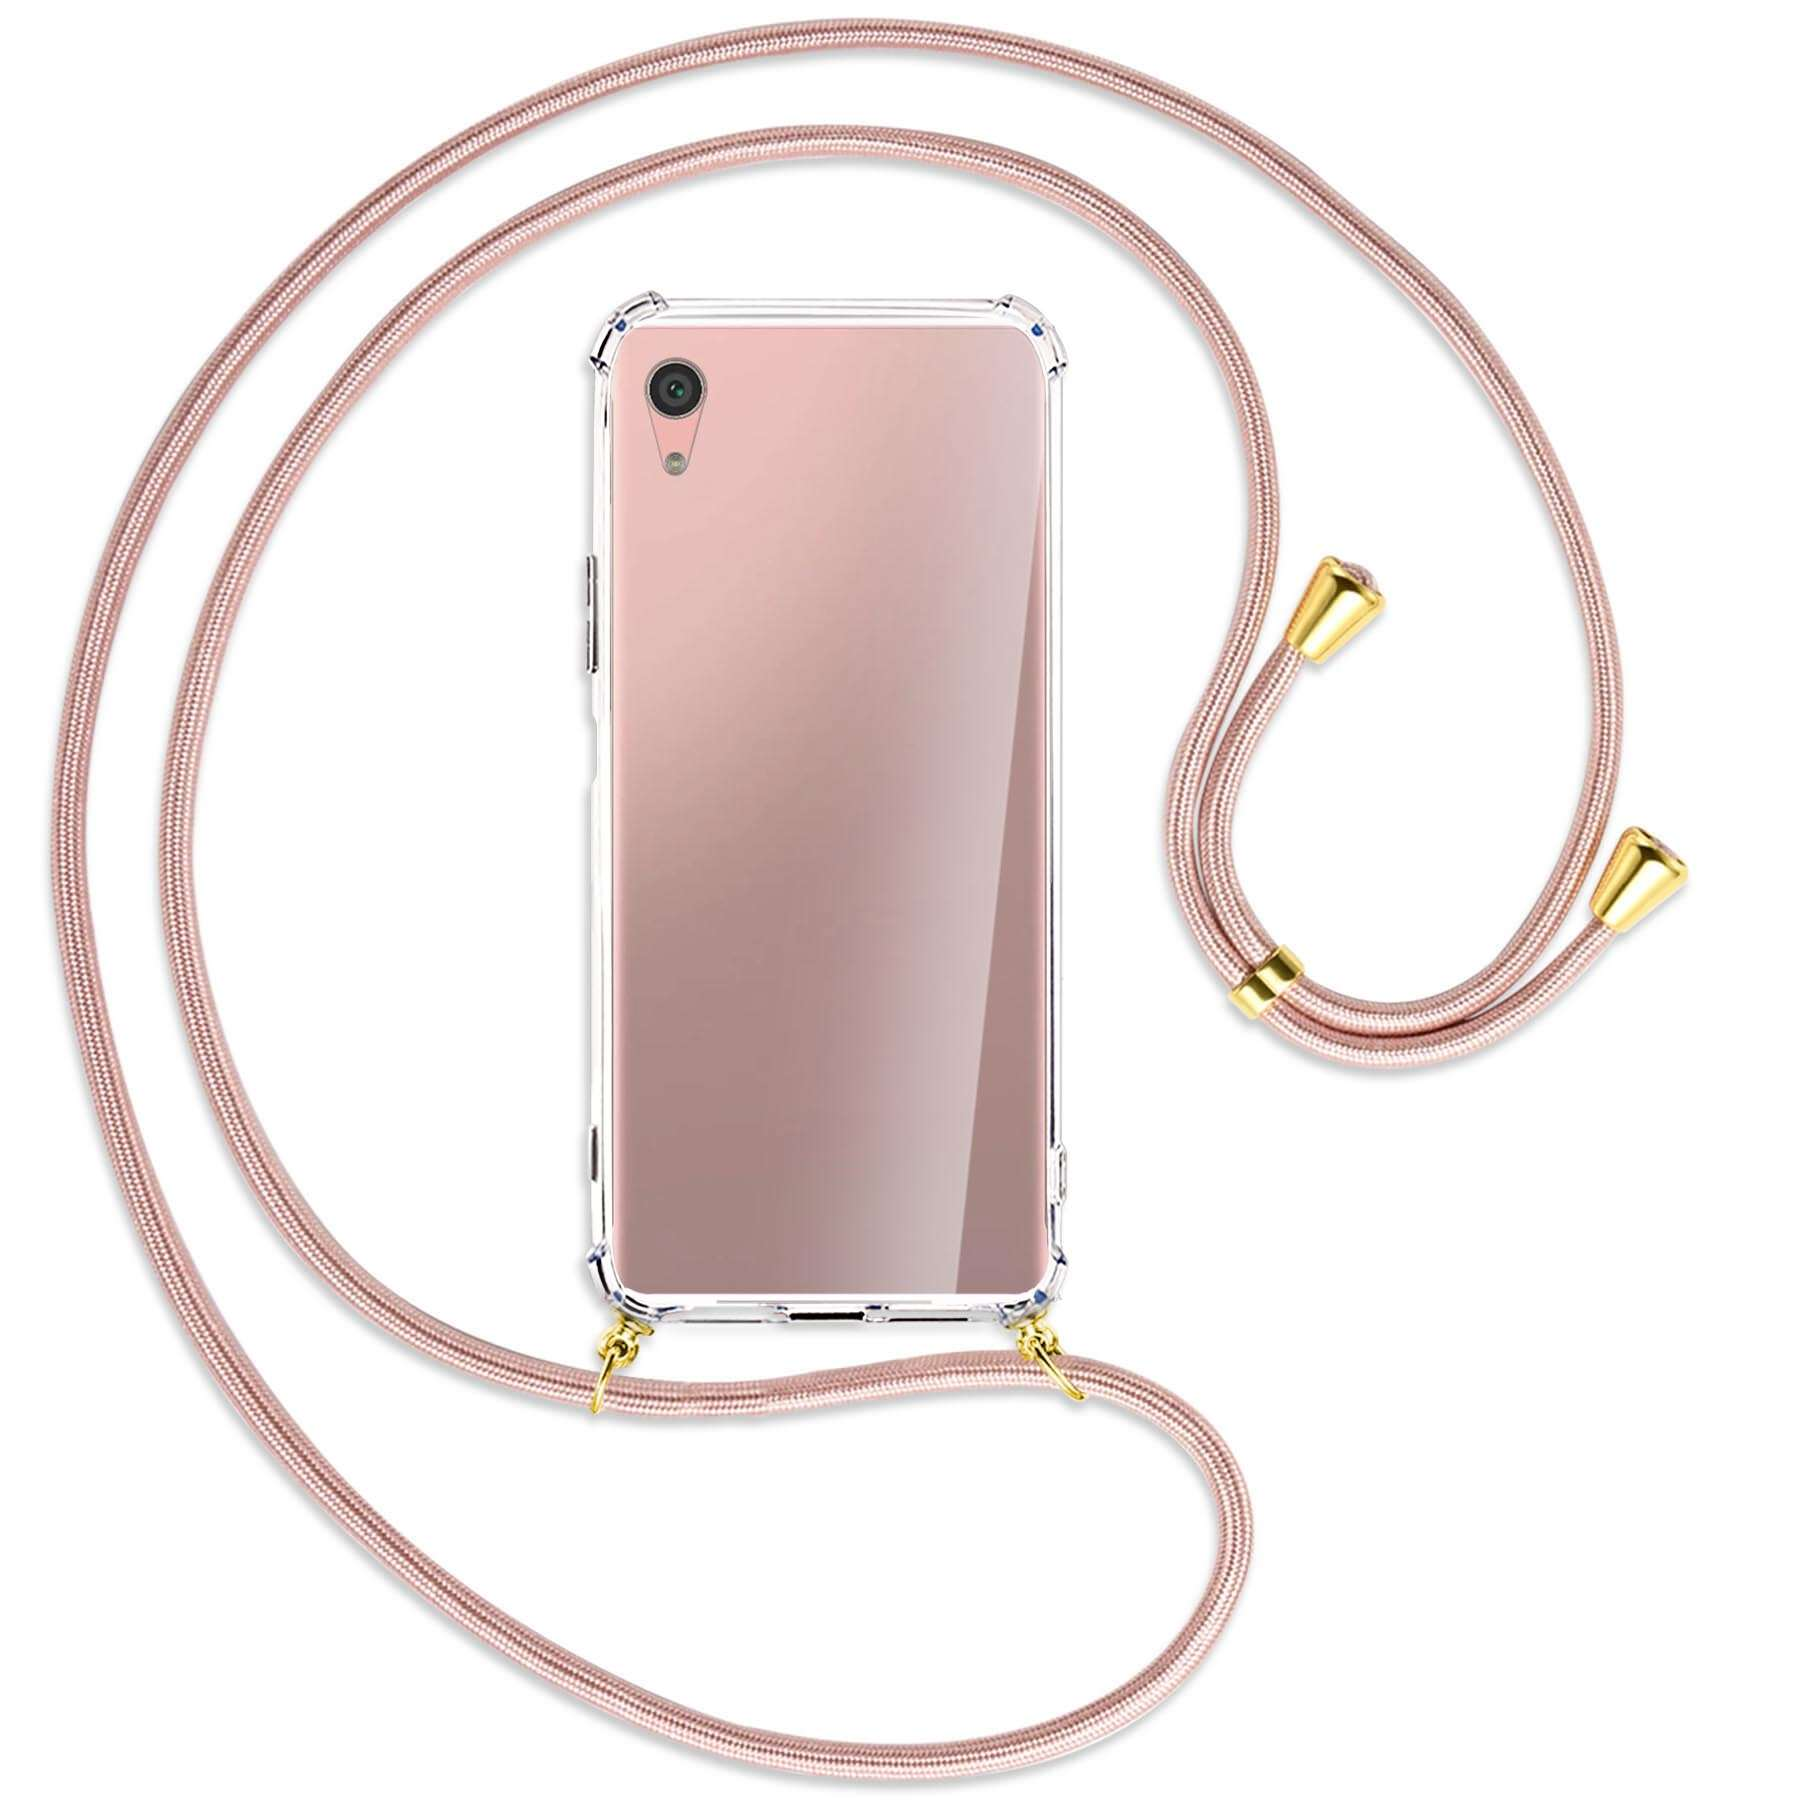 Xperia Rosegold MTB Backcover, XA1 Sony, Kordel, mit ENERGY Plus, Gold Umhänge-Hülle MORE /